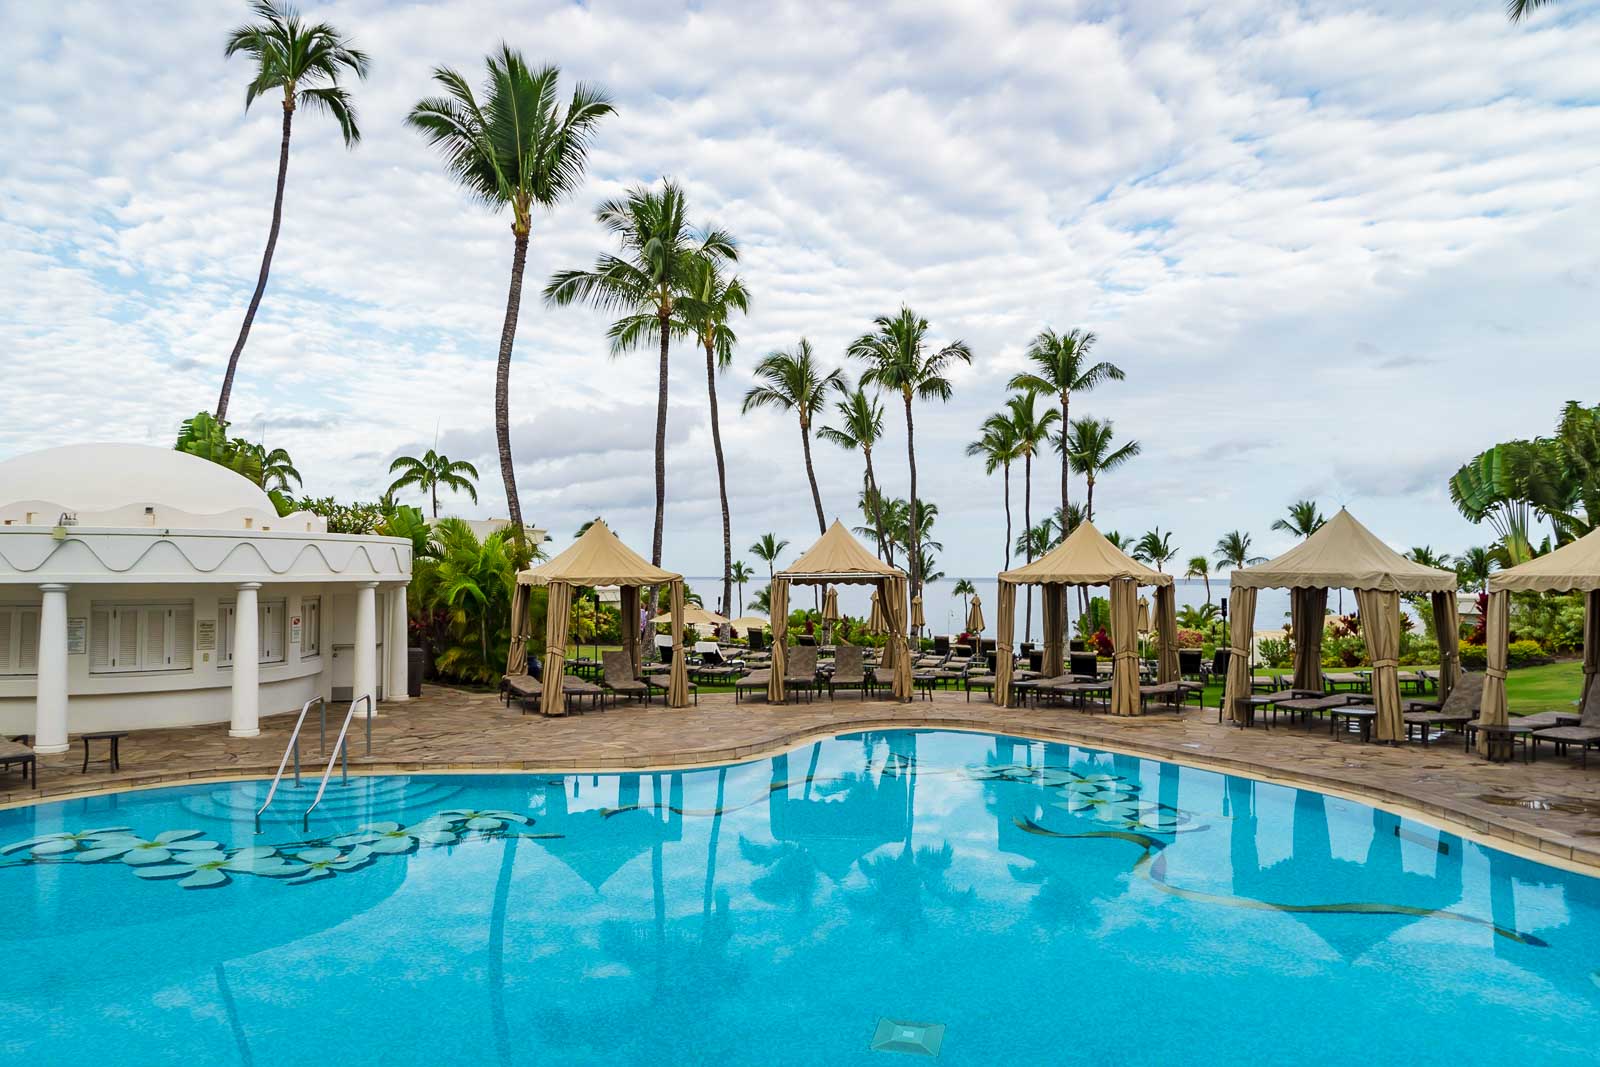 Where to stay in Maui South